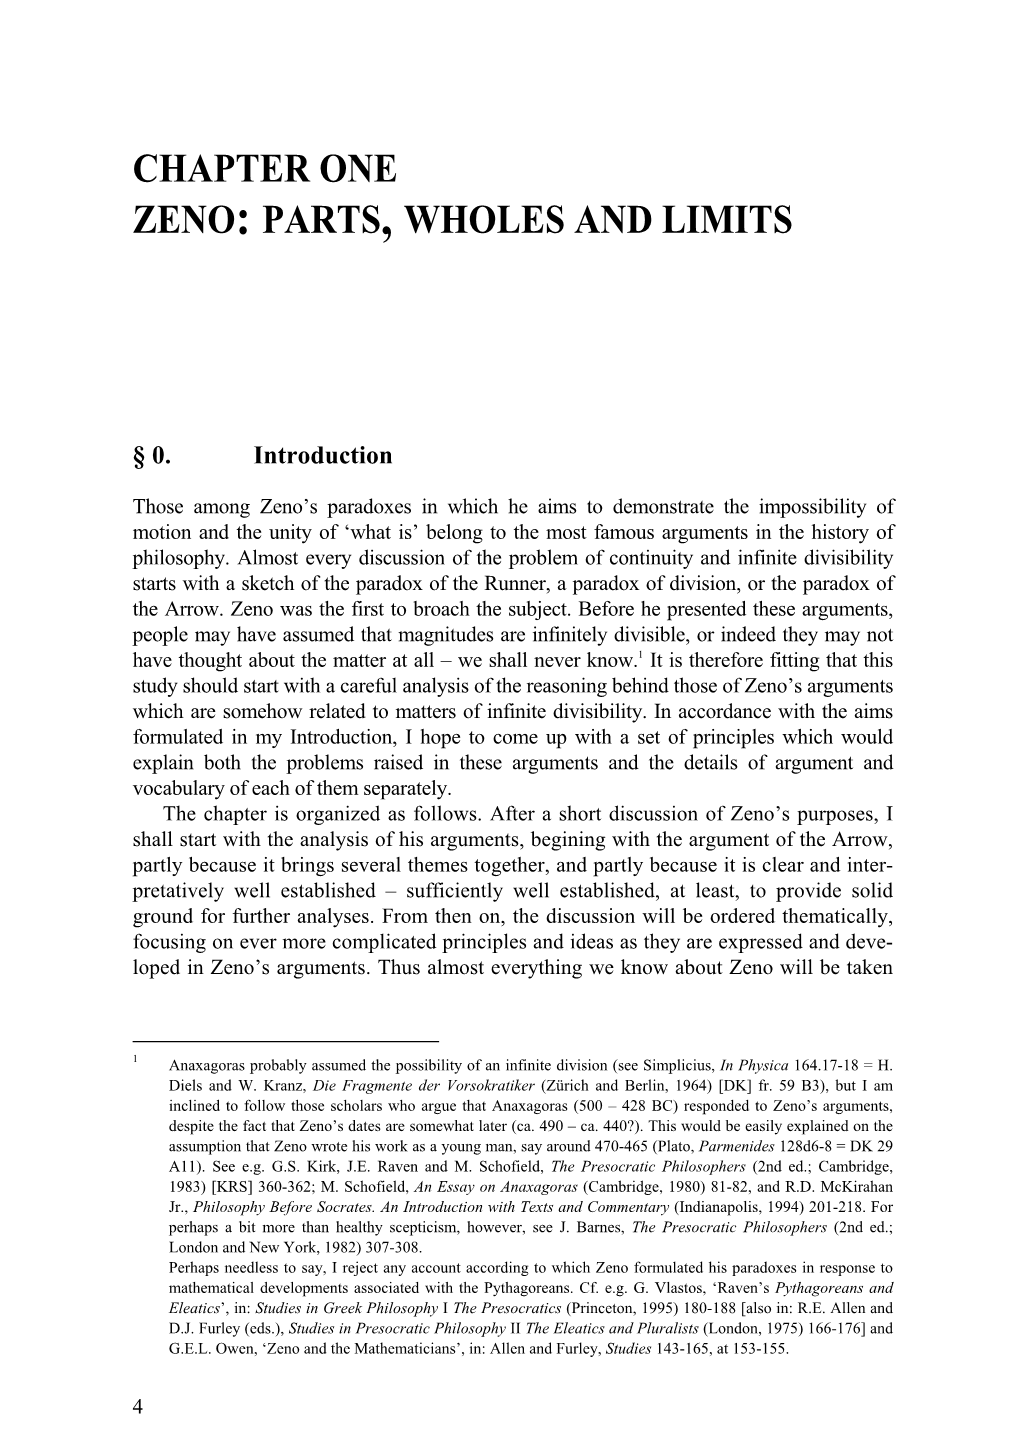 Chapter One Zeno: Parts, Wholes and Limits